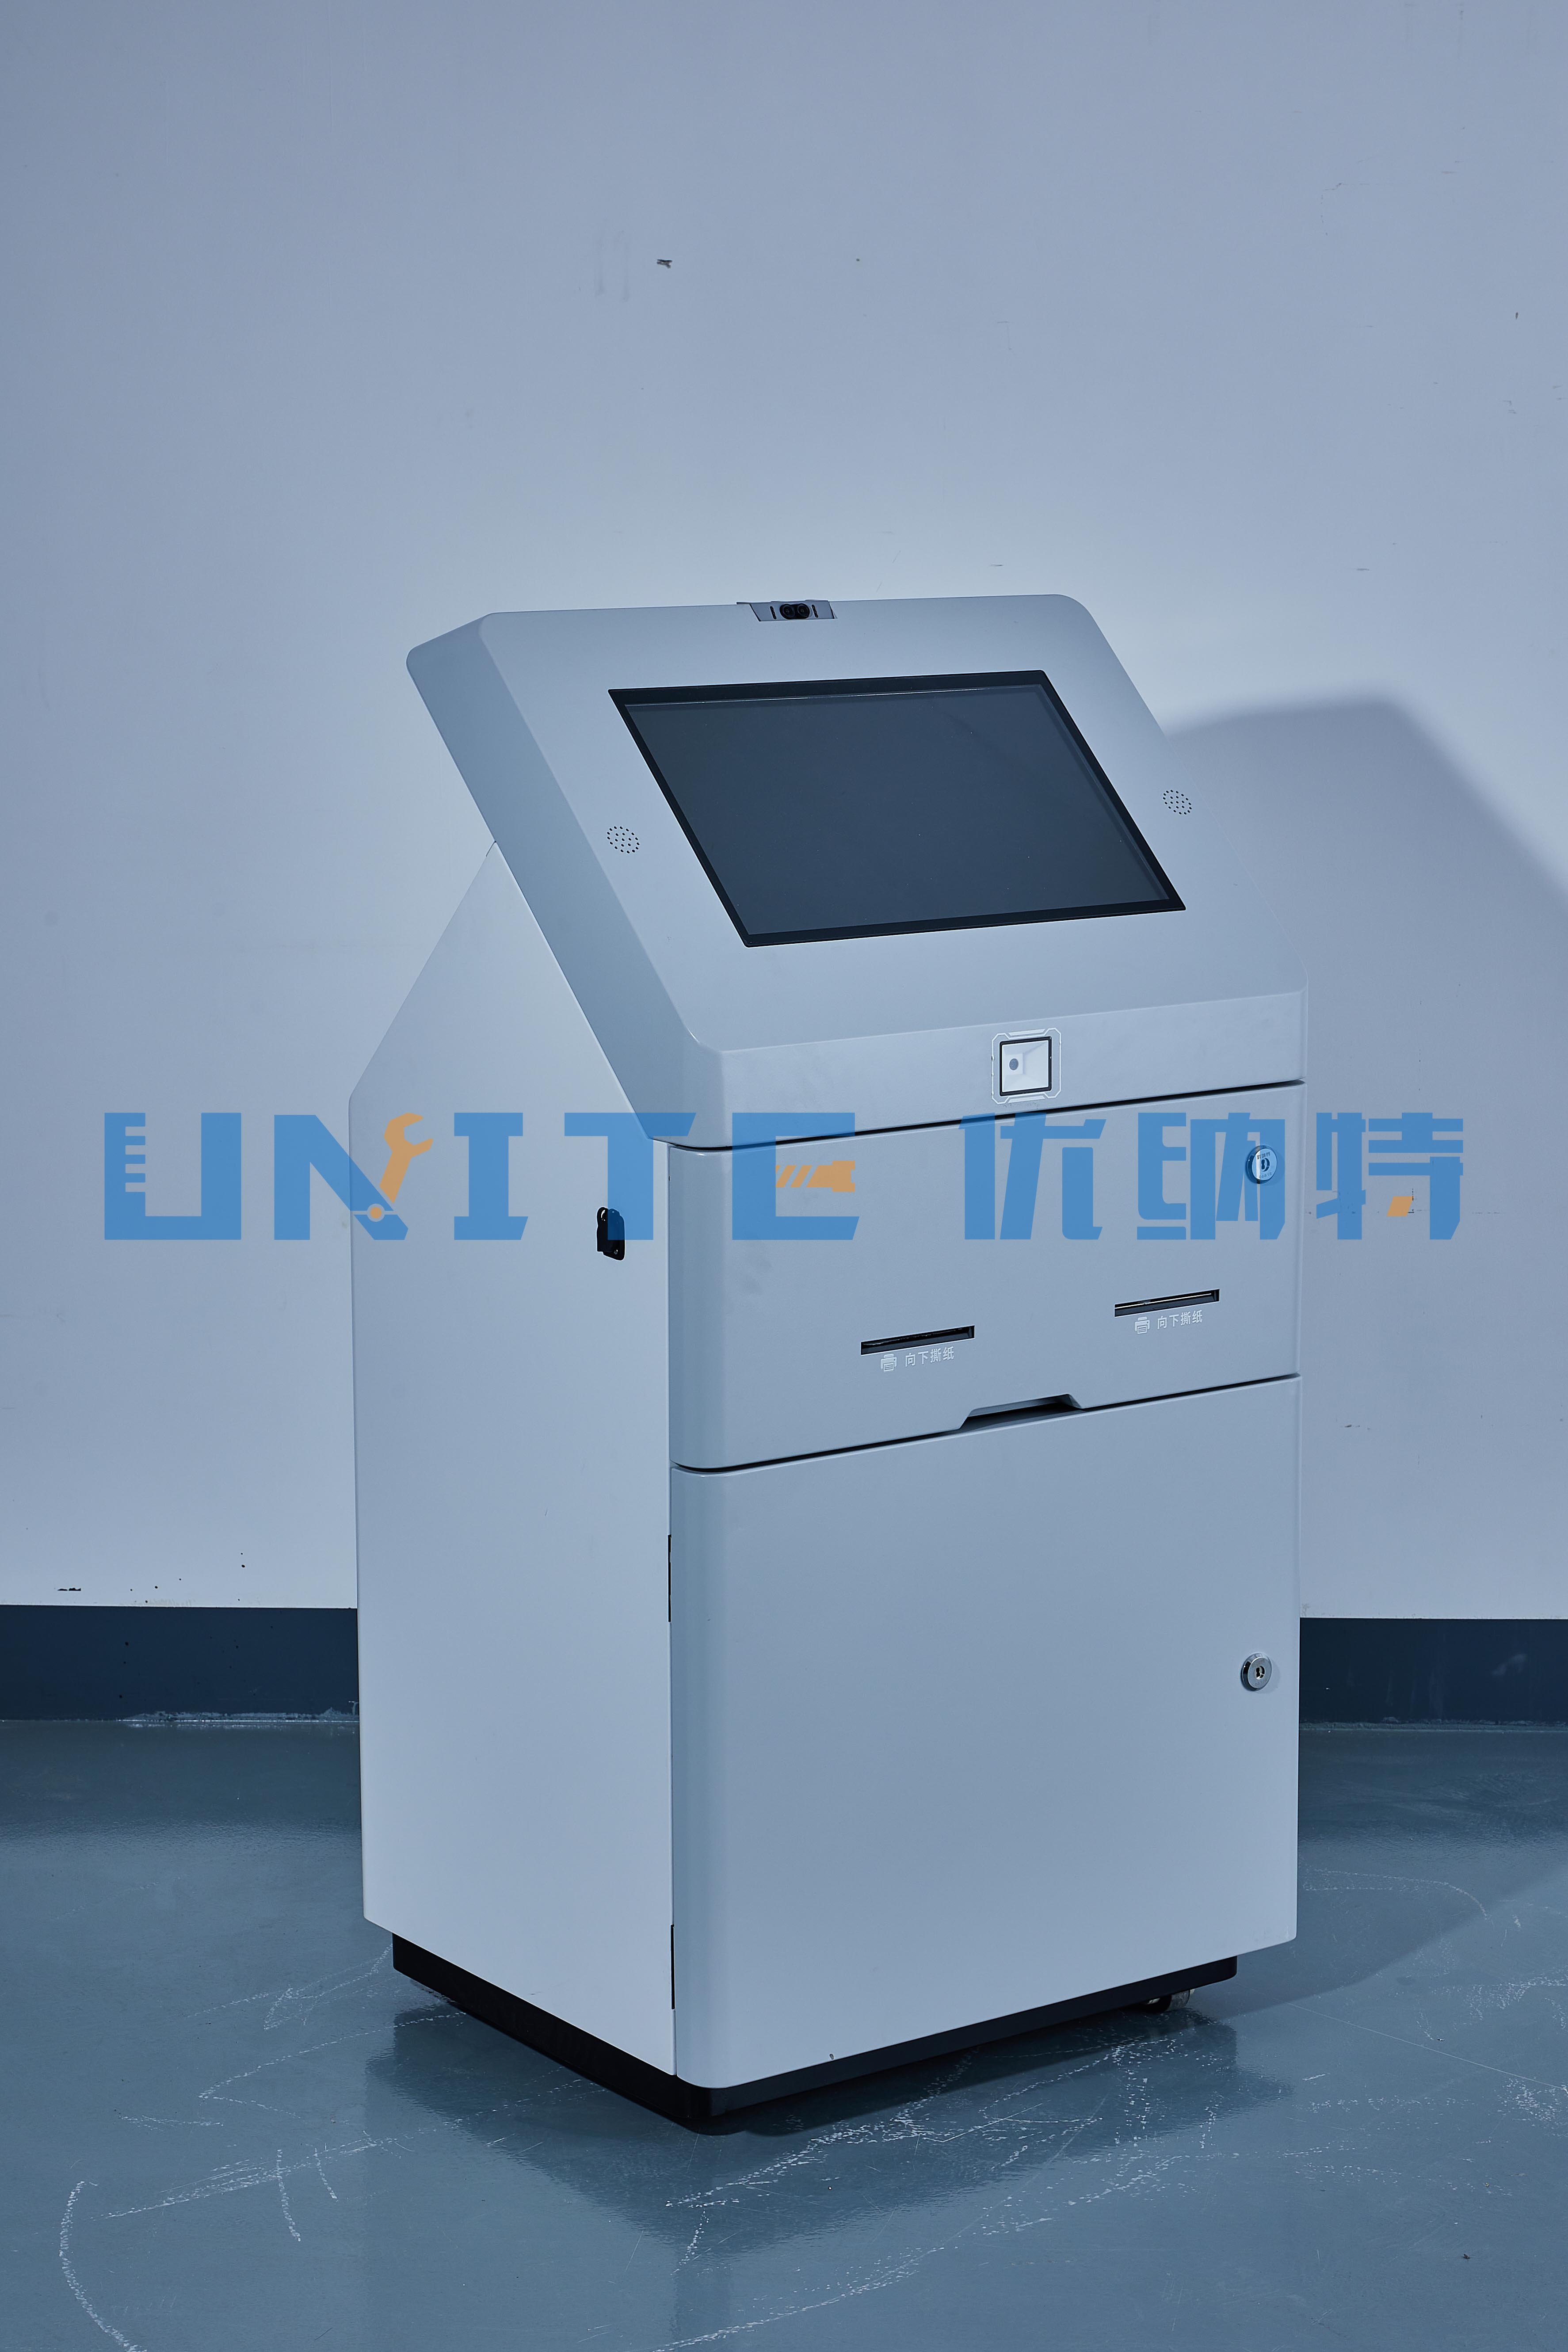 Unite Usample T-P Matrix IOT Management System Self Service Printing Terminal with Multiple Printing Modes